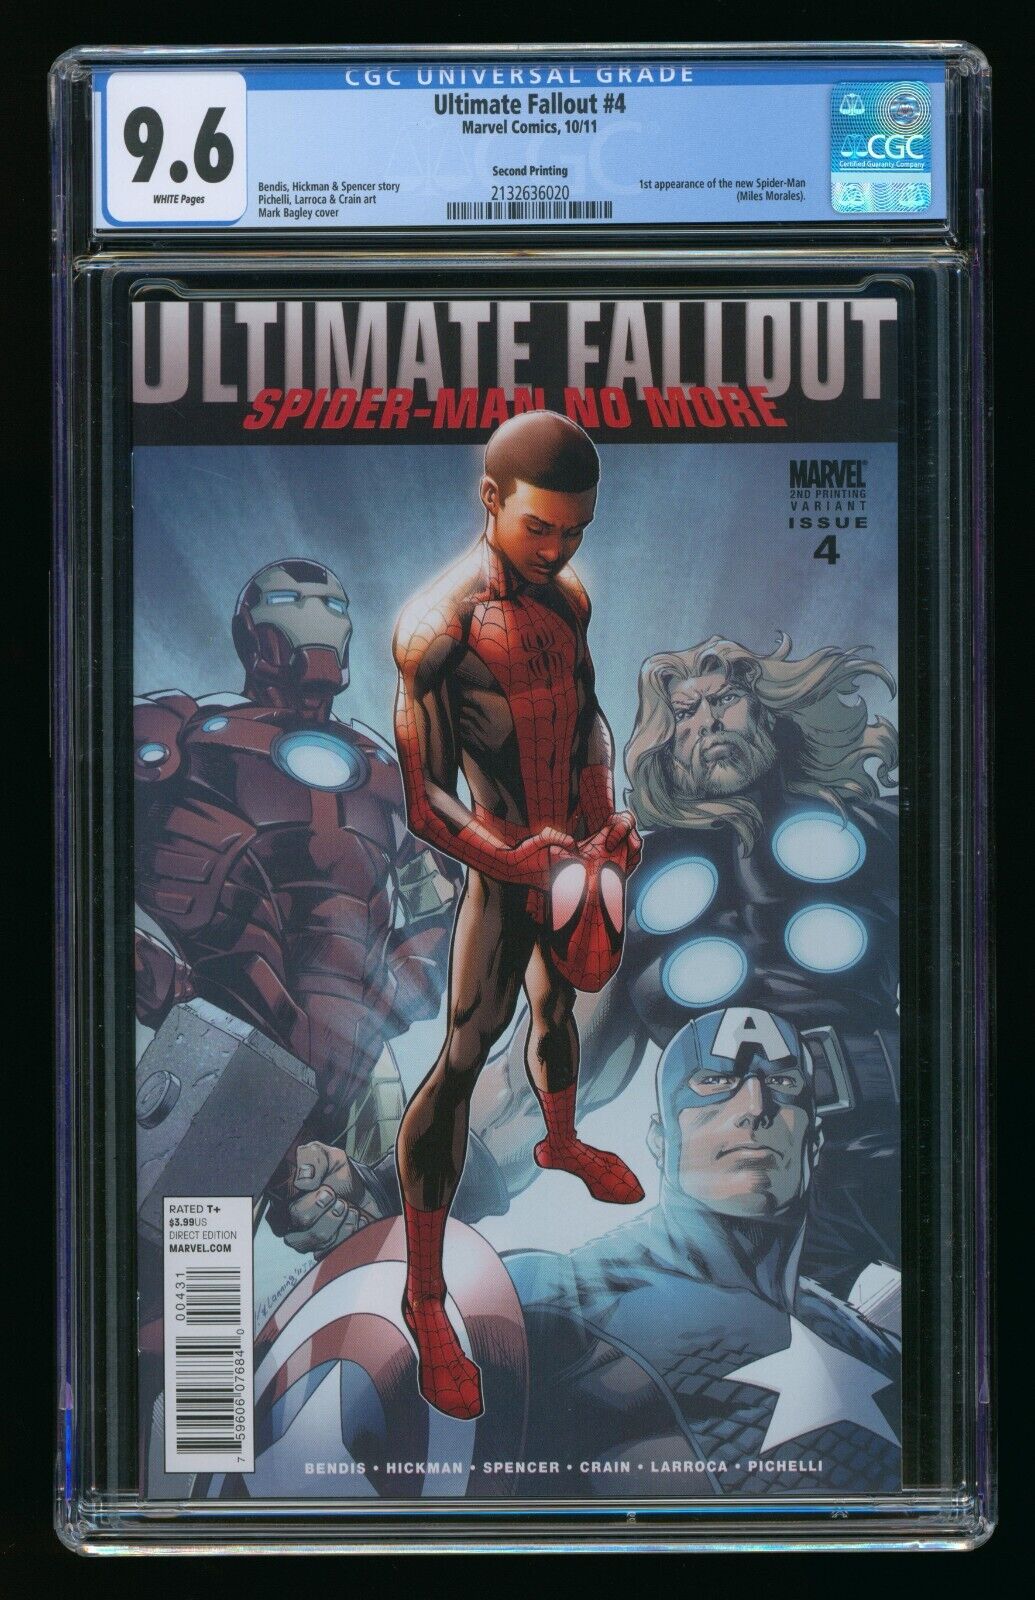 ULTIMTAE FALLOUT #4 (2011) CGC 9.6 1st MILE MORALES NEW SPIDER-MAN 2nd PRINTING